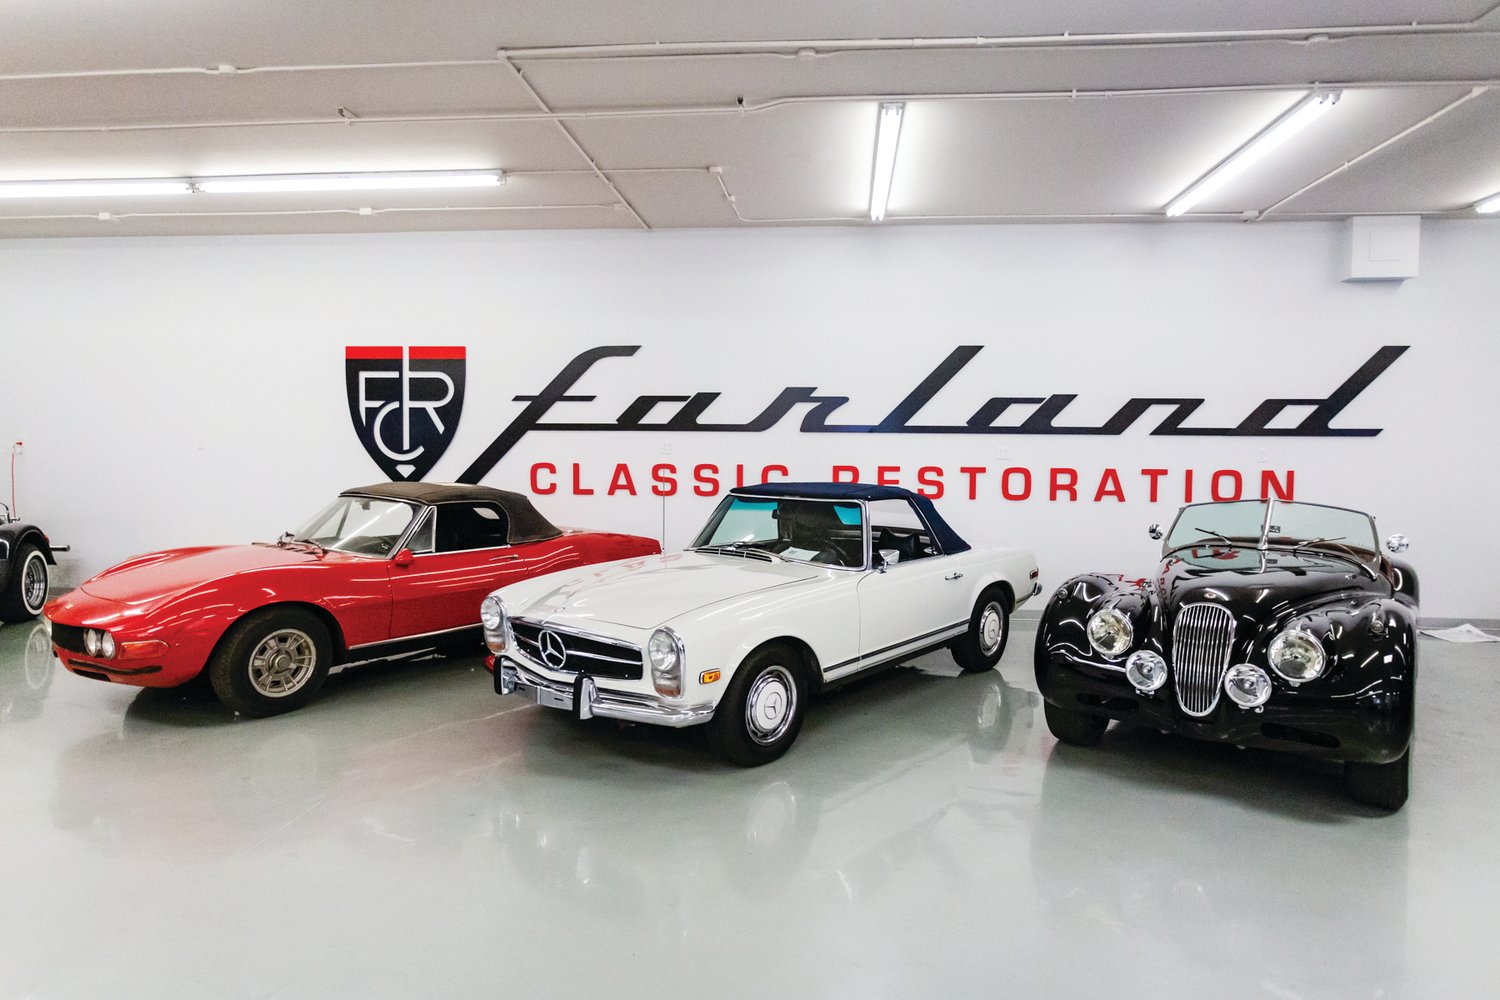 Farland Classic Restoration restores vintage cars such as this 1967 Fiat Dino, 1969 Mercedes-Benz 280SL and 1954 Jaguar XK120.